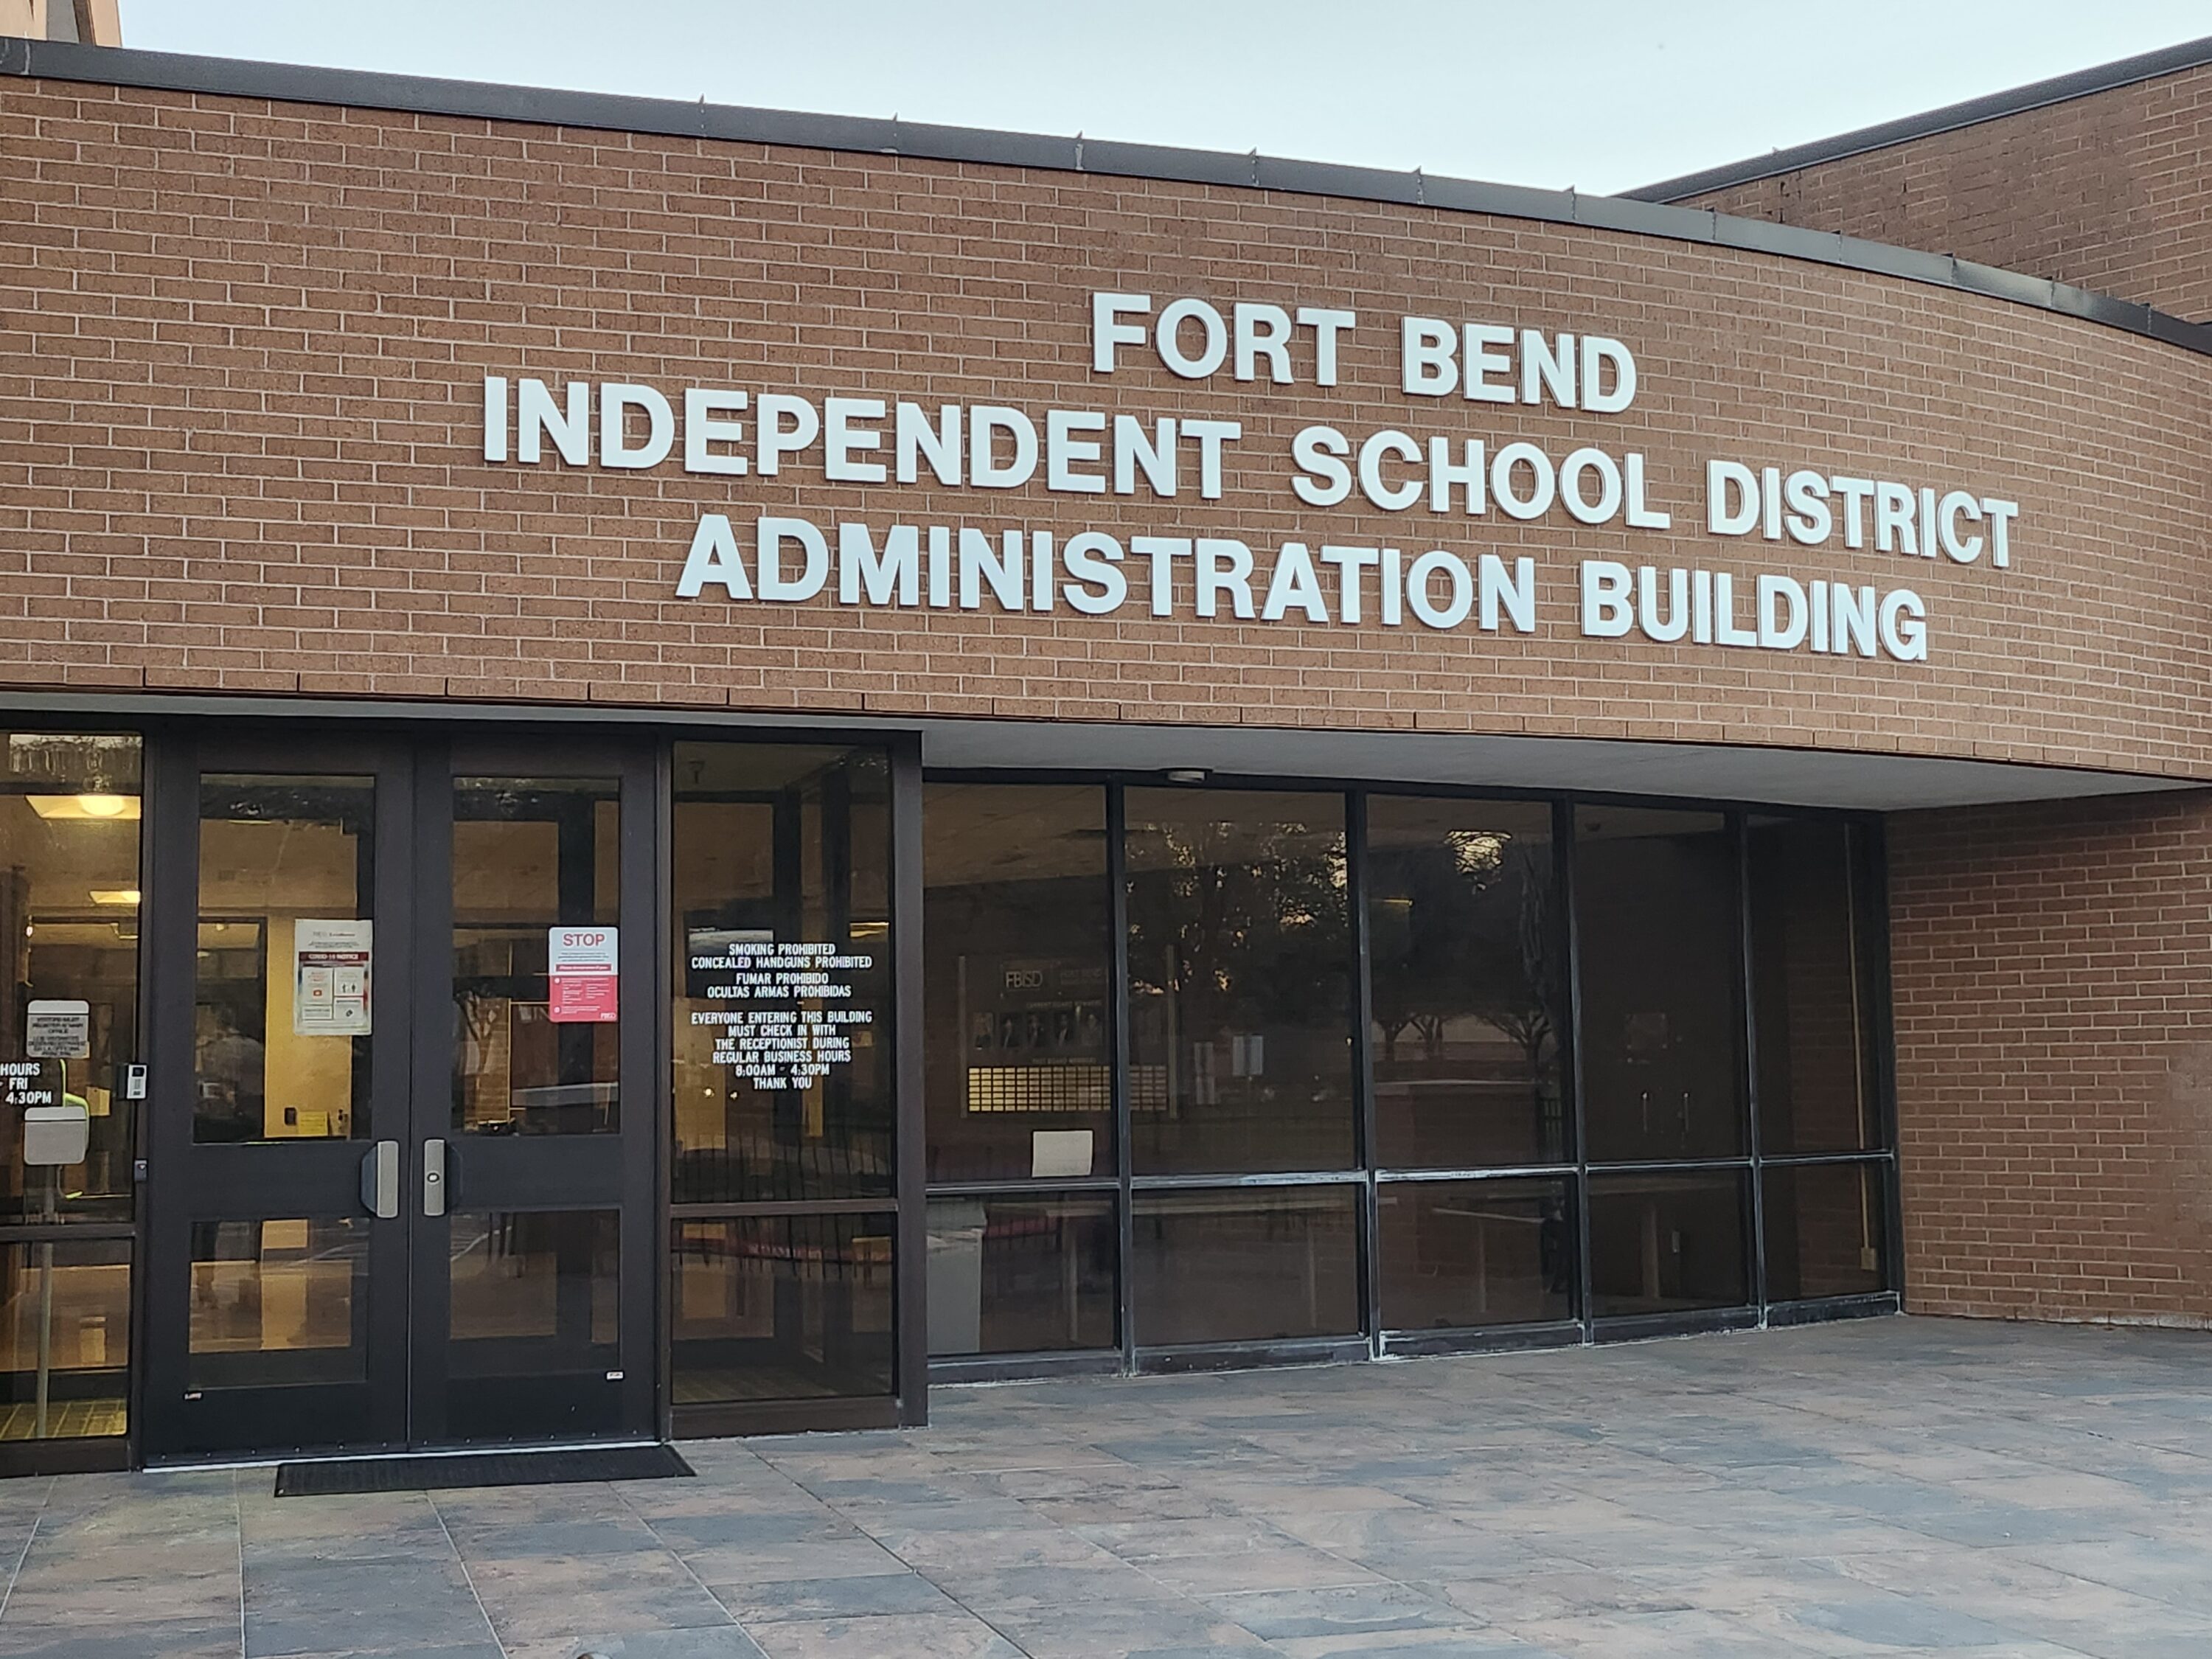 Fort Bend ISD wants voters to approve property tax increase to help